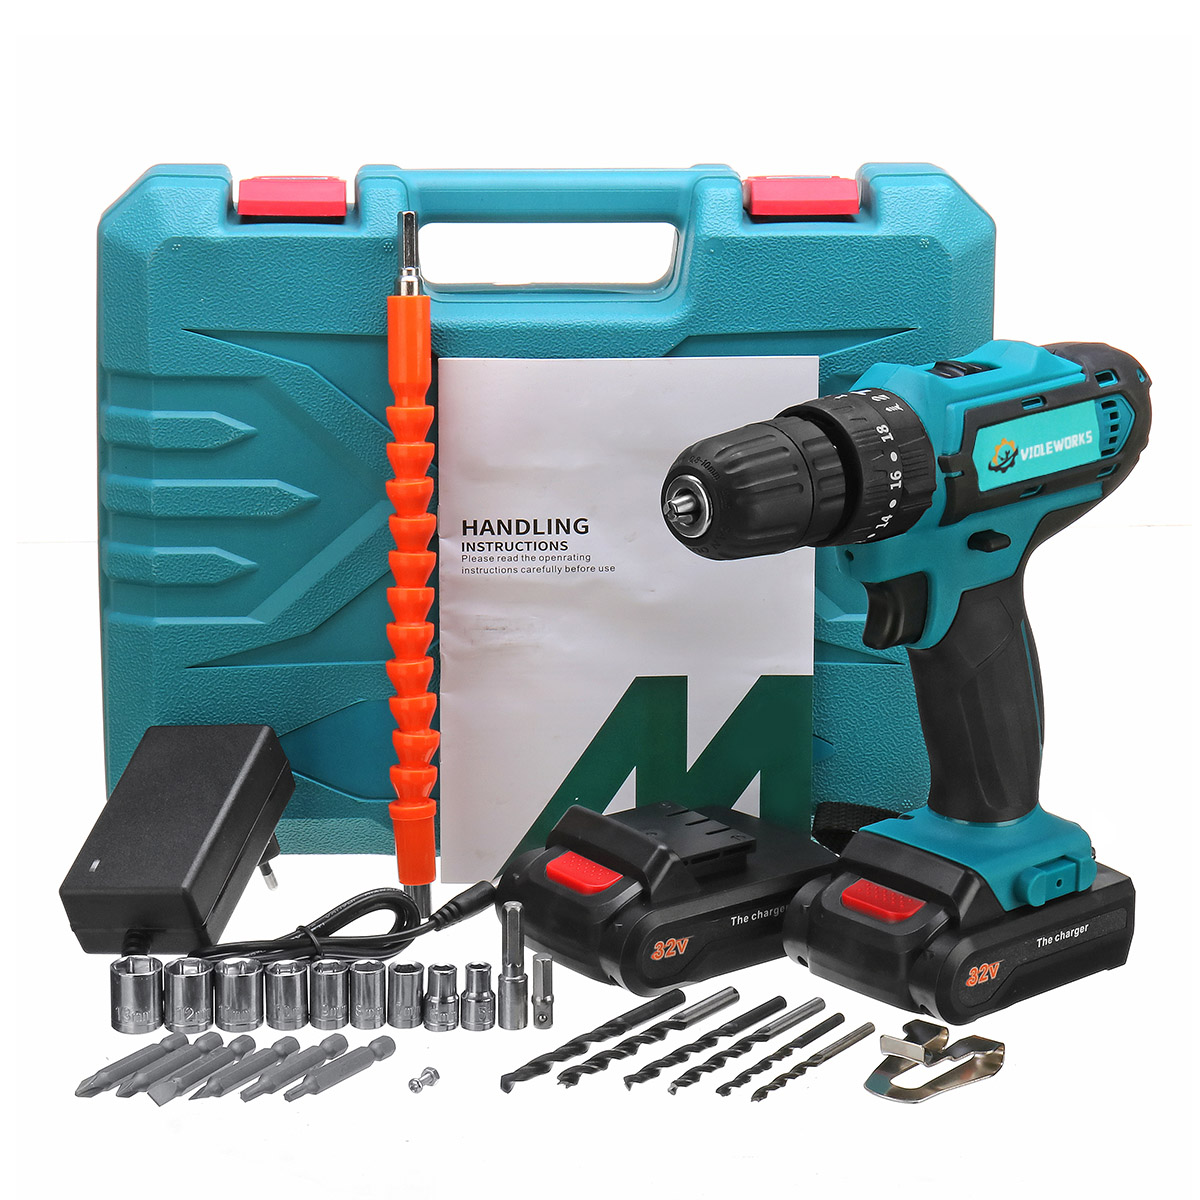 2-Speed-Power-Drills-6000mah-Cordless-Drill-3-IN-1-Electric-Screwdriver-Hammer-Drill-with-2pcs-Batte-1416071-5